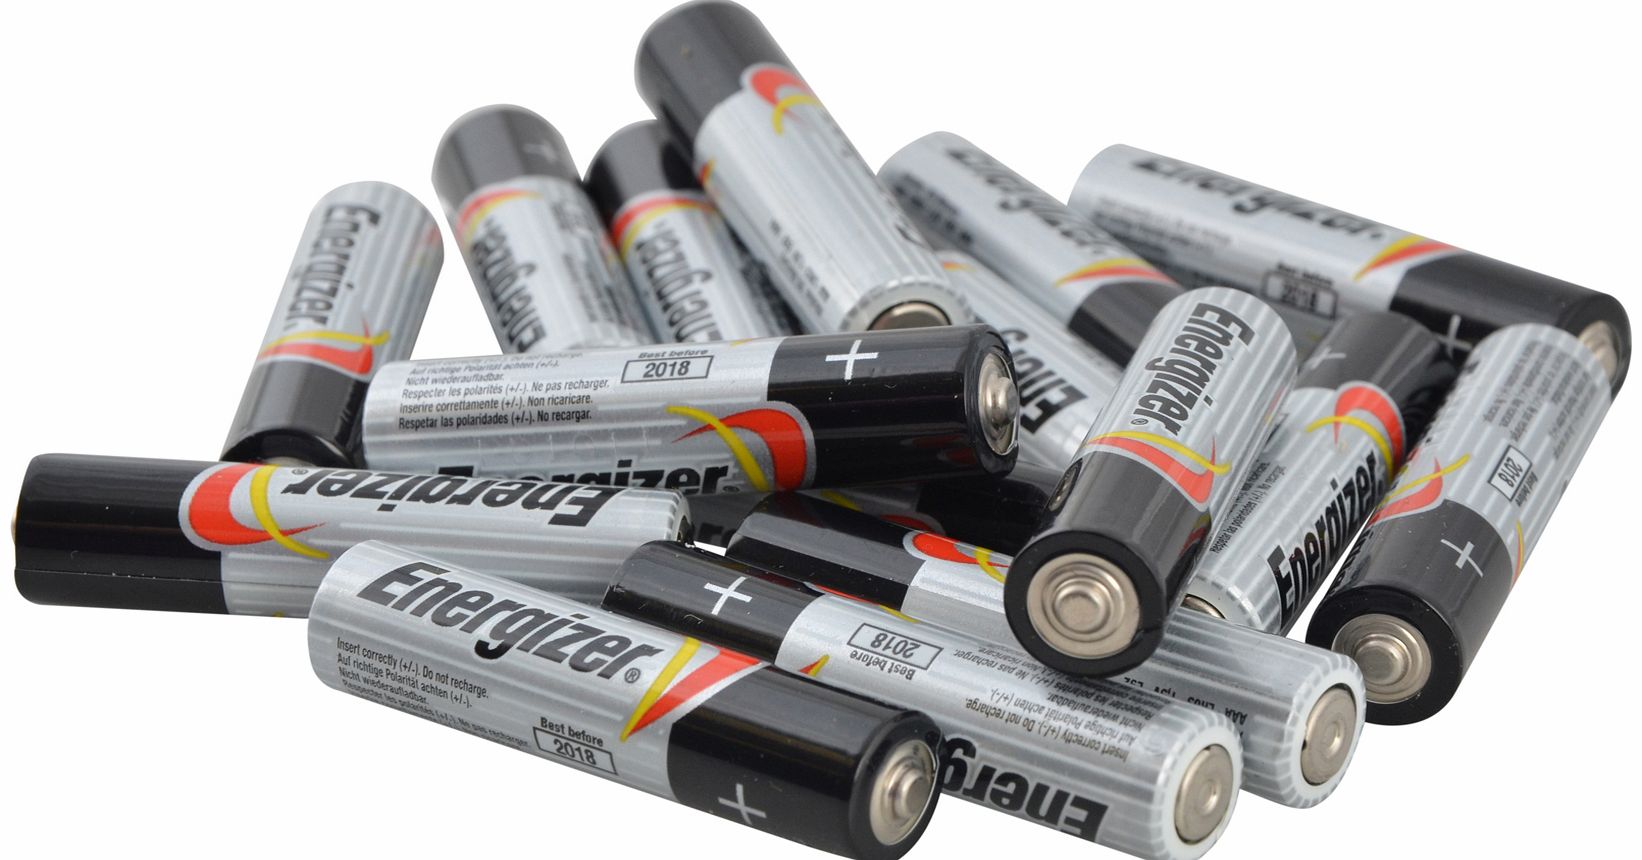 Energizer AAA Cell Batteries Pack of 16